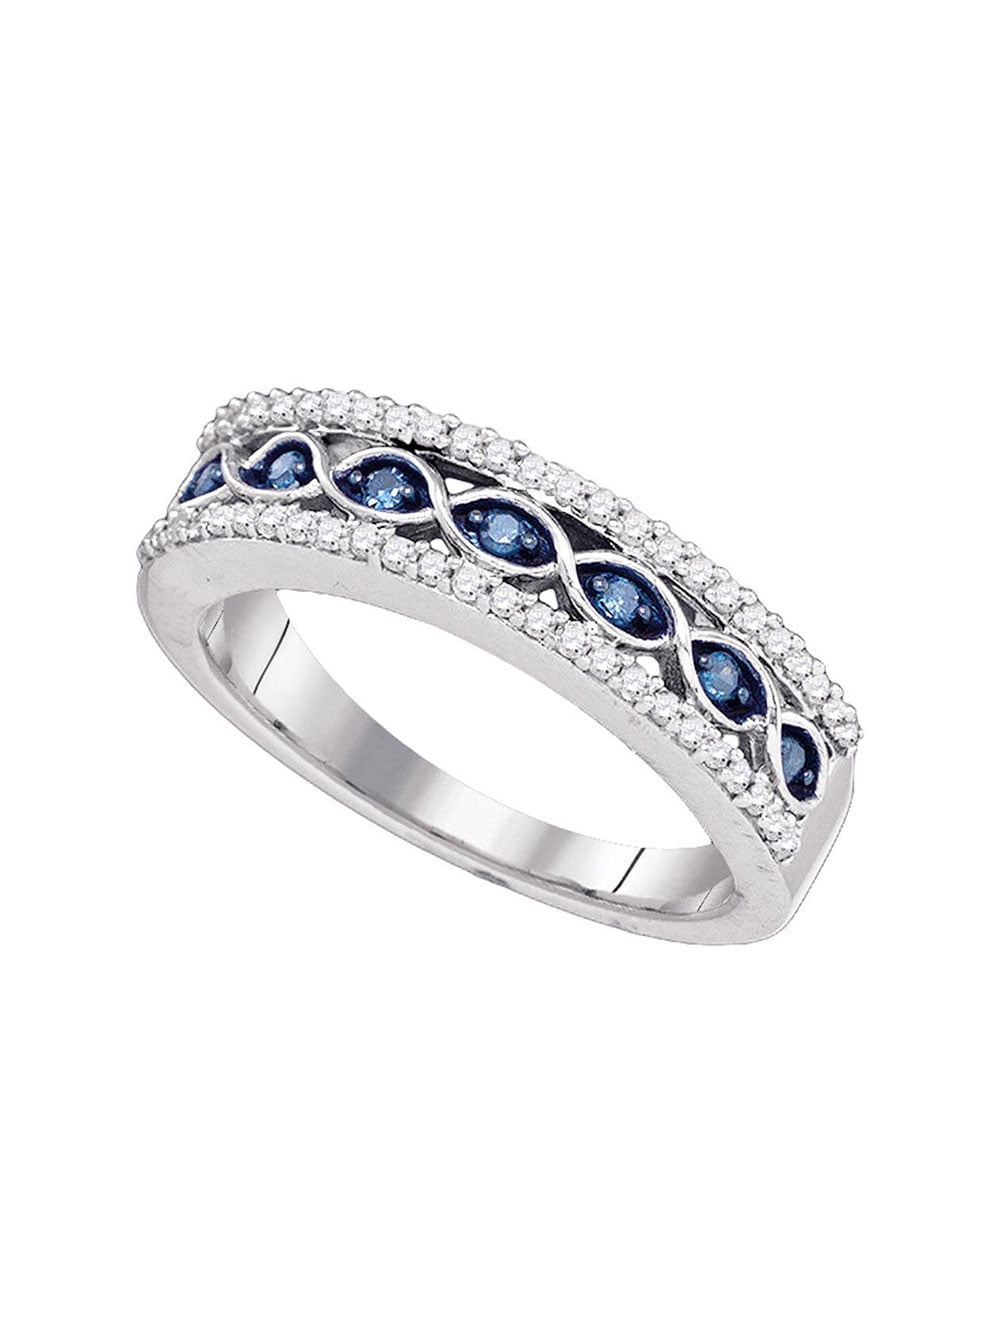 10kt White Gold Womens Round Blue Color Enhanced Diamond Band Ring 1/3 Cttw